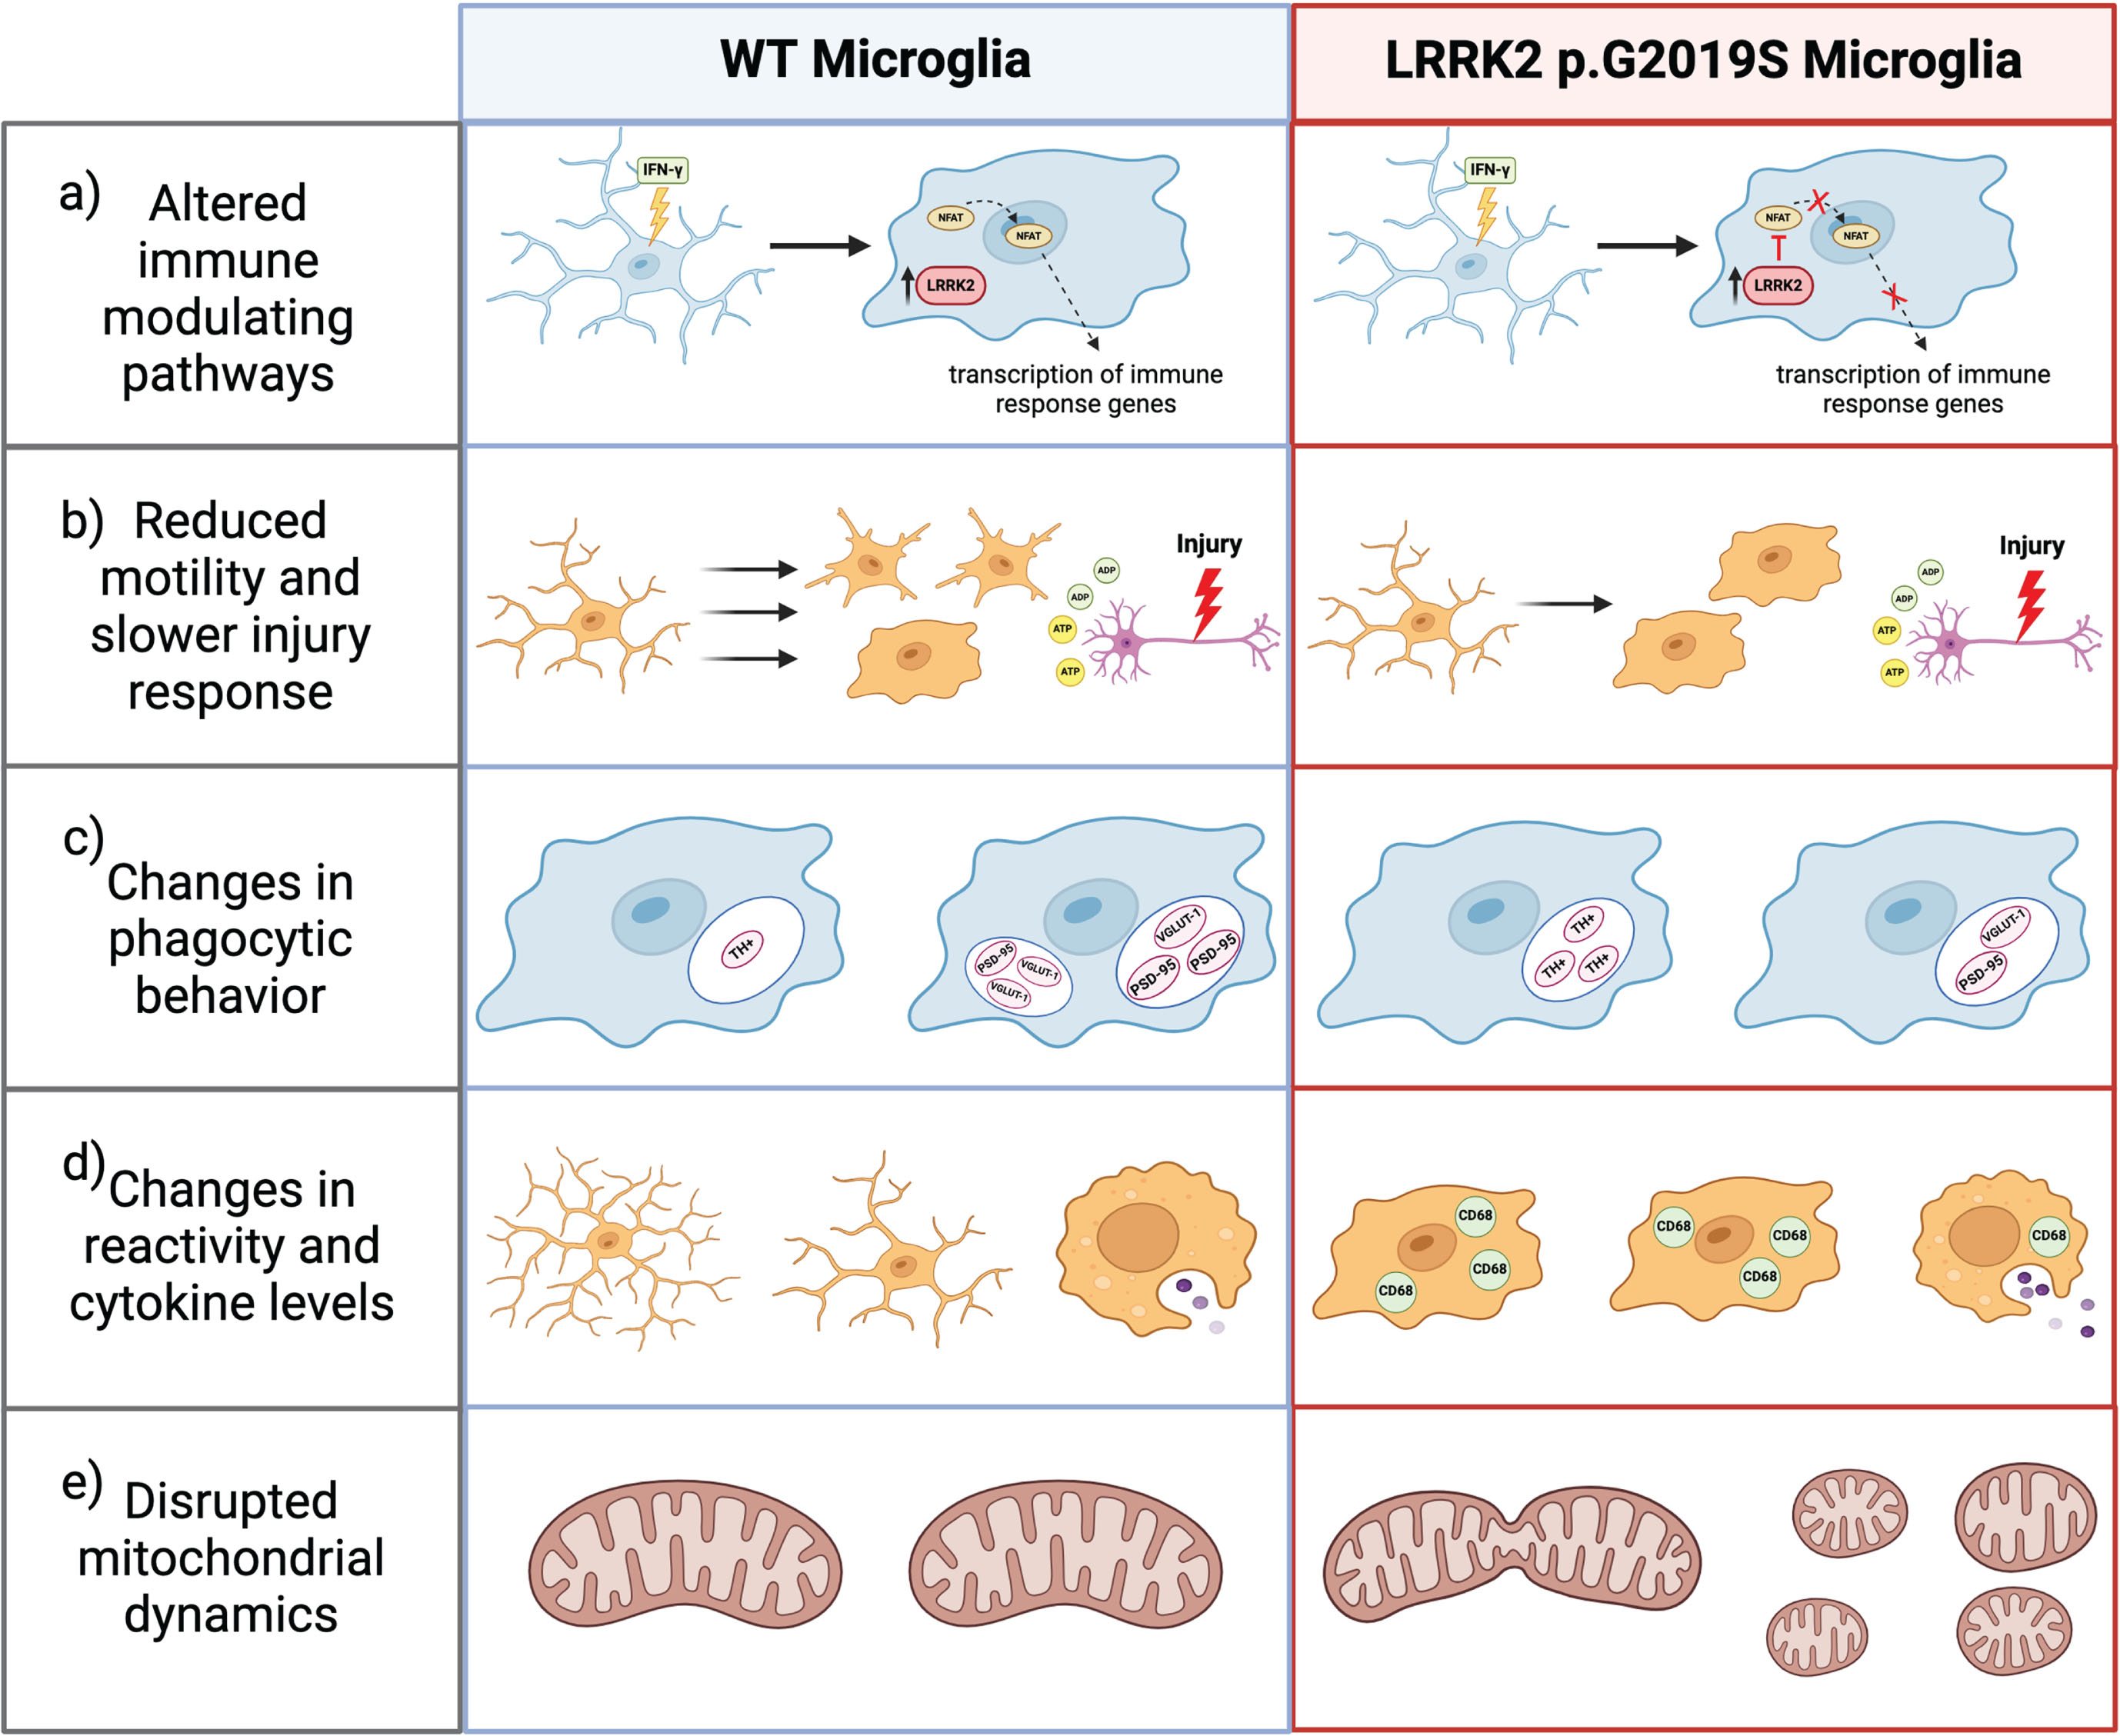 The effects of PD-linked LRRK2 mutations in microglia. The presence of LRRK2 p.G2019S in microglia a) inhibits NFAT nuclear localization in response to interferon-γ altering immune response, b) worsens microglial speed and capacity to respond to injury, c) alters phagocytic behavior such that more DA terminals and fewer excitatory synapses are phagocytosed, d) increases microglial activation and CD68 cytokine levels, and e) increases mitochondrial fission. Created with biorender.com [66].